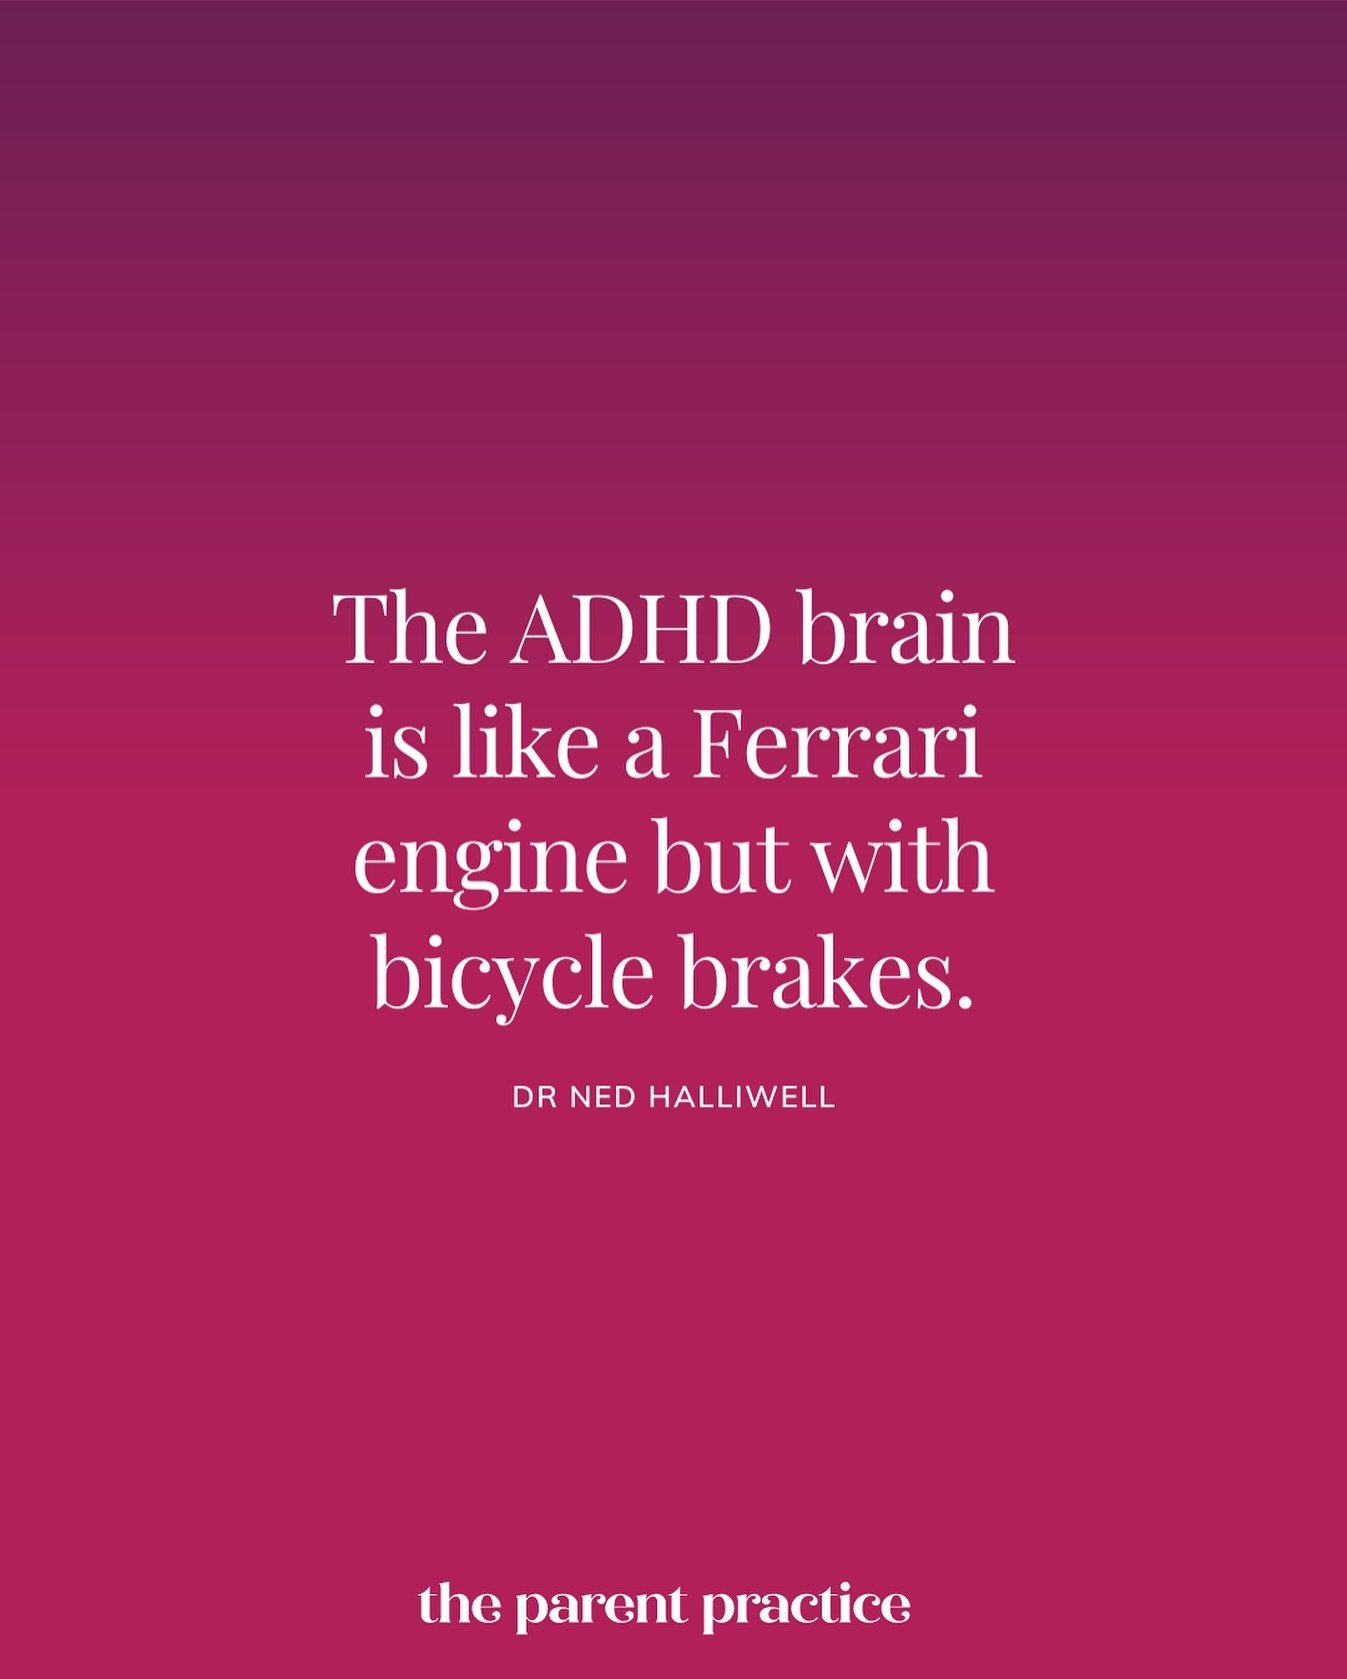 Just like a Ferrari engine, the ADHD brain is bursting with potential and energy. But without the right support and understanding, it&rsquo;s like having bicycle brakes holding it back. Let&rsquo;s help every ADHD brain reach its full potential by of